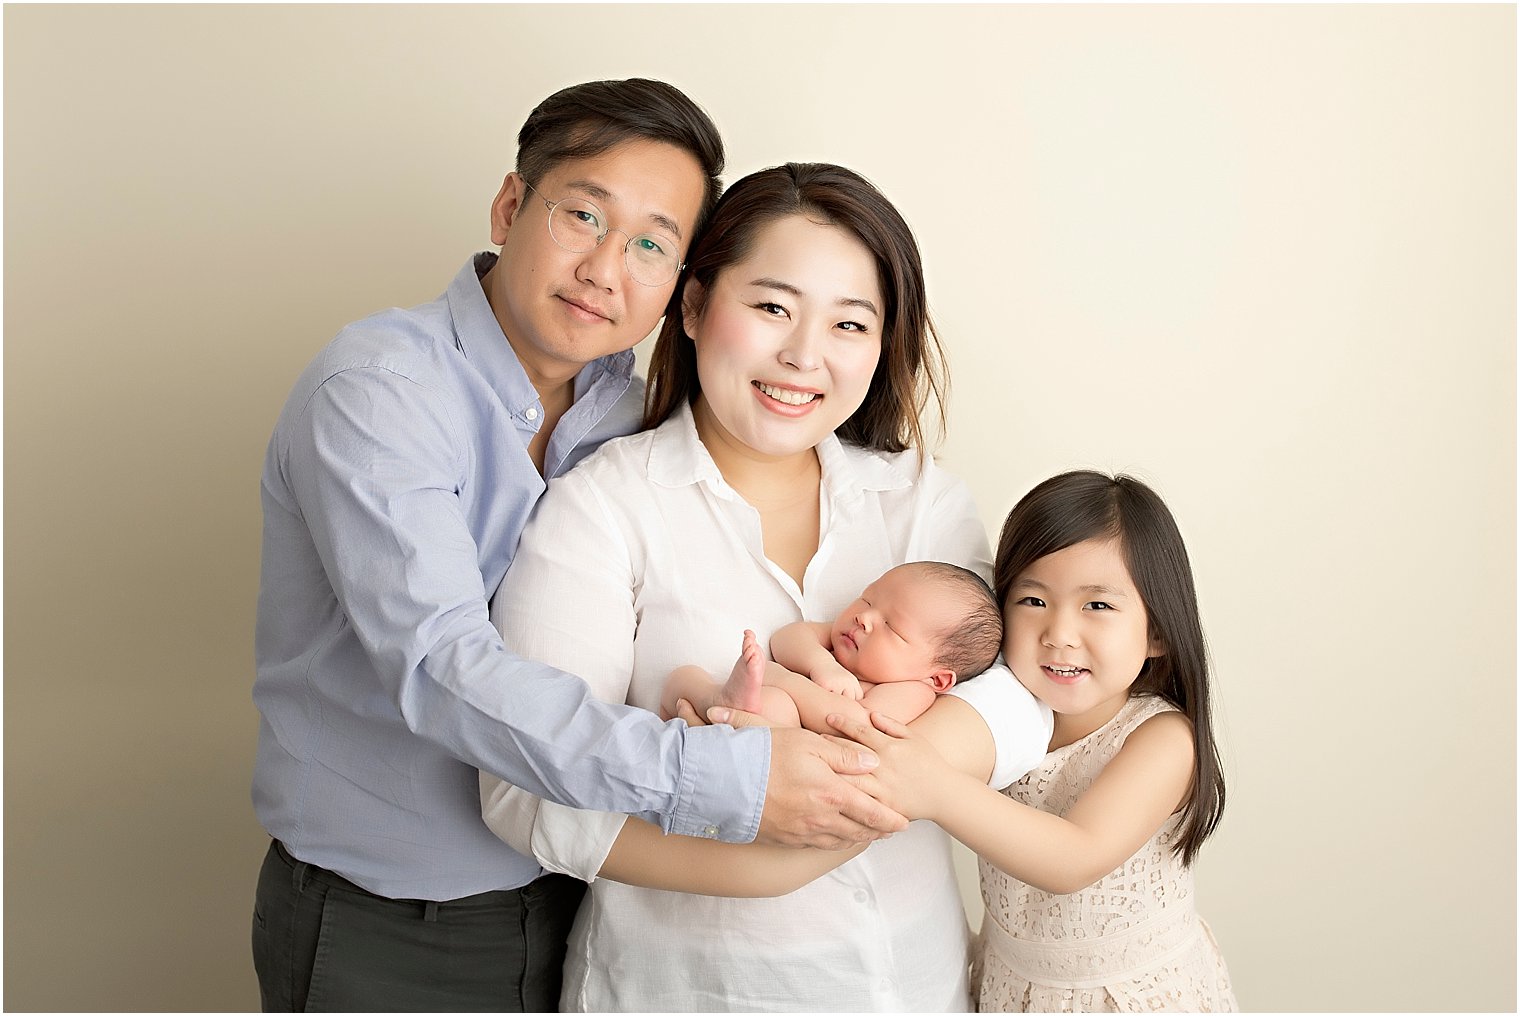 Portrait session of family of 4 with newborn baby